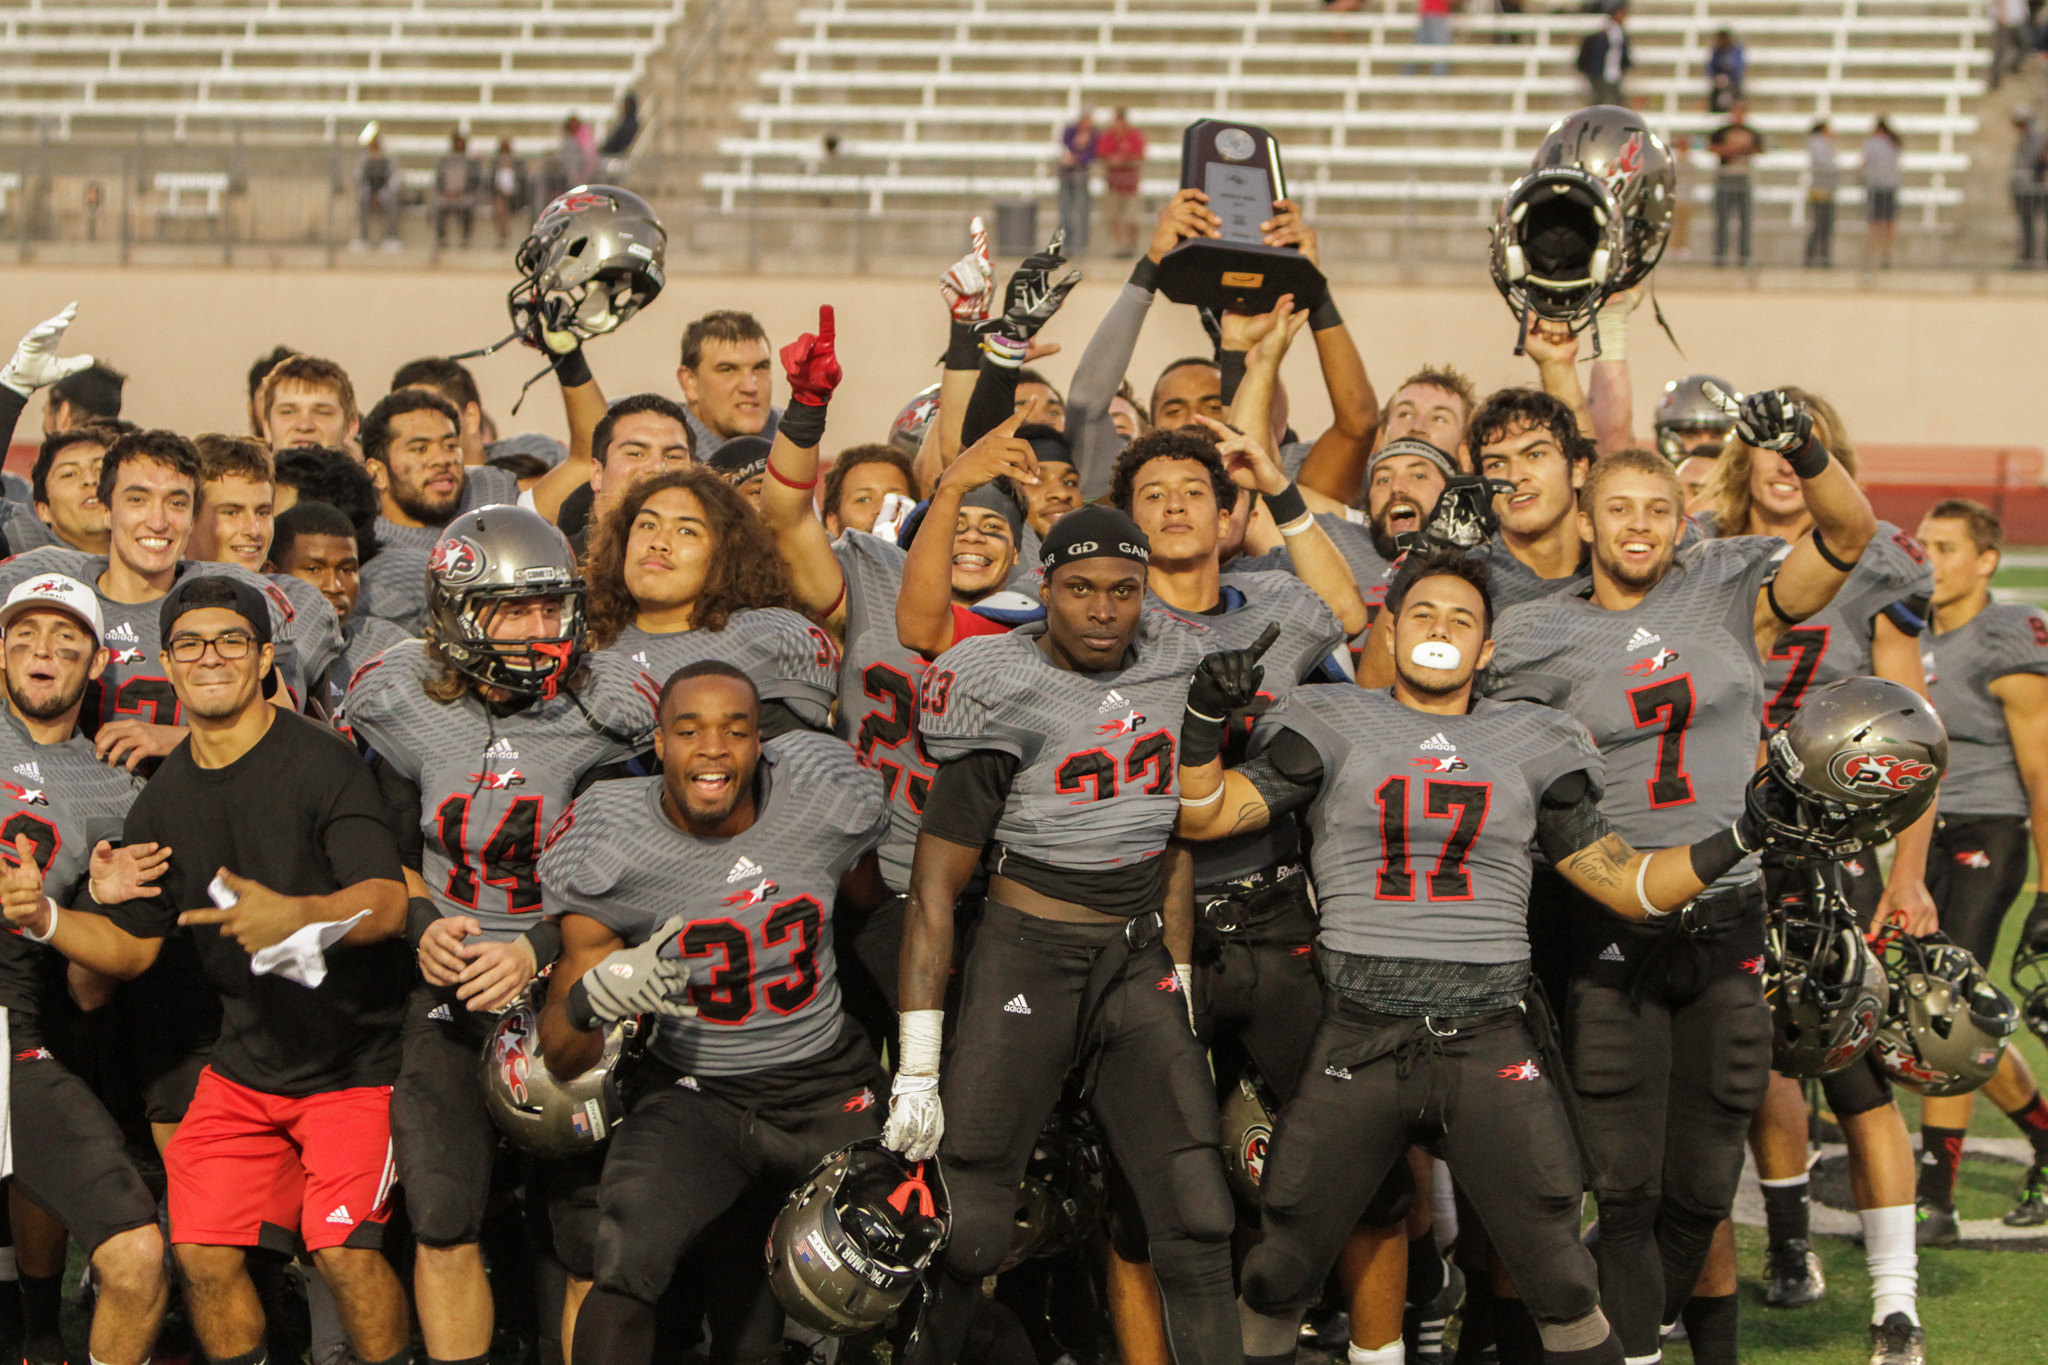 A team of Palomar football players gather and pose for a picture after they won a game. Several in the background hold up their helmets and a trophy.